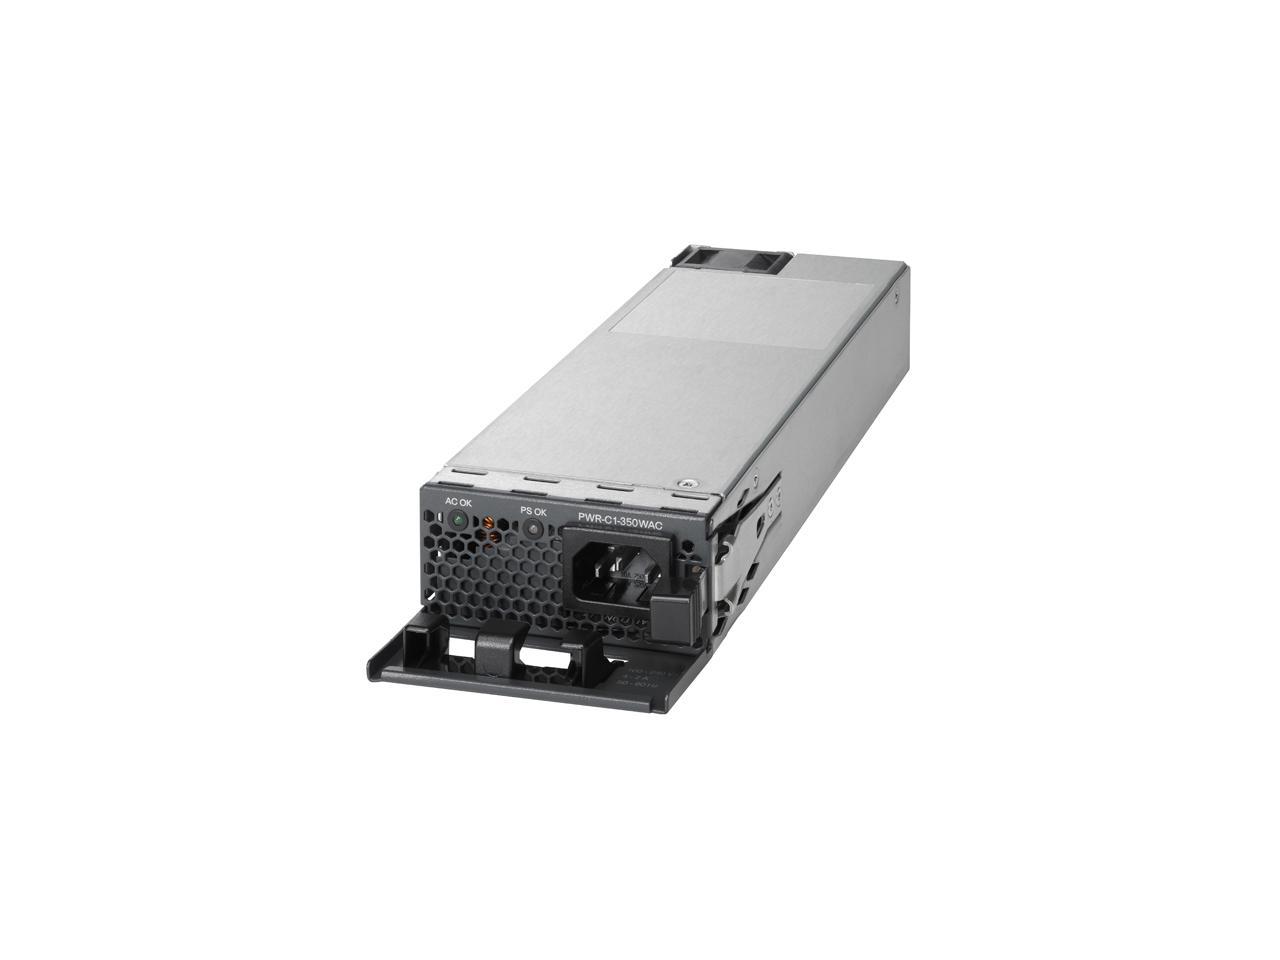 ***NEW***Cisco PWR-C1-350WAC 350W for Catalyst 3850 Series Power Supply